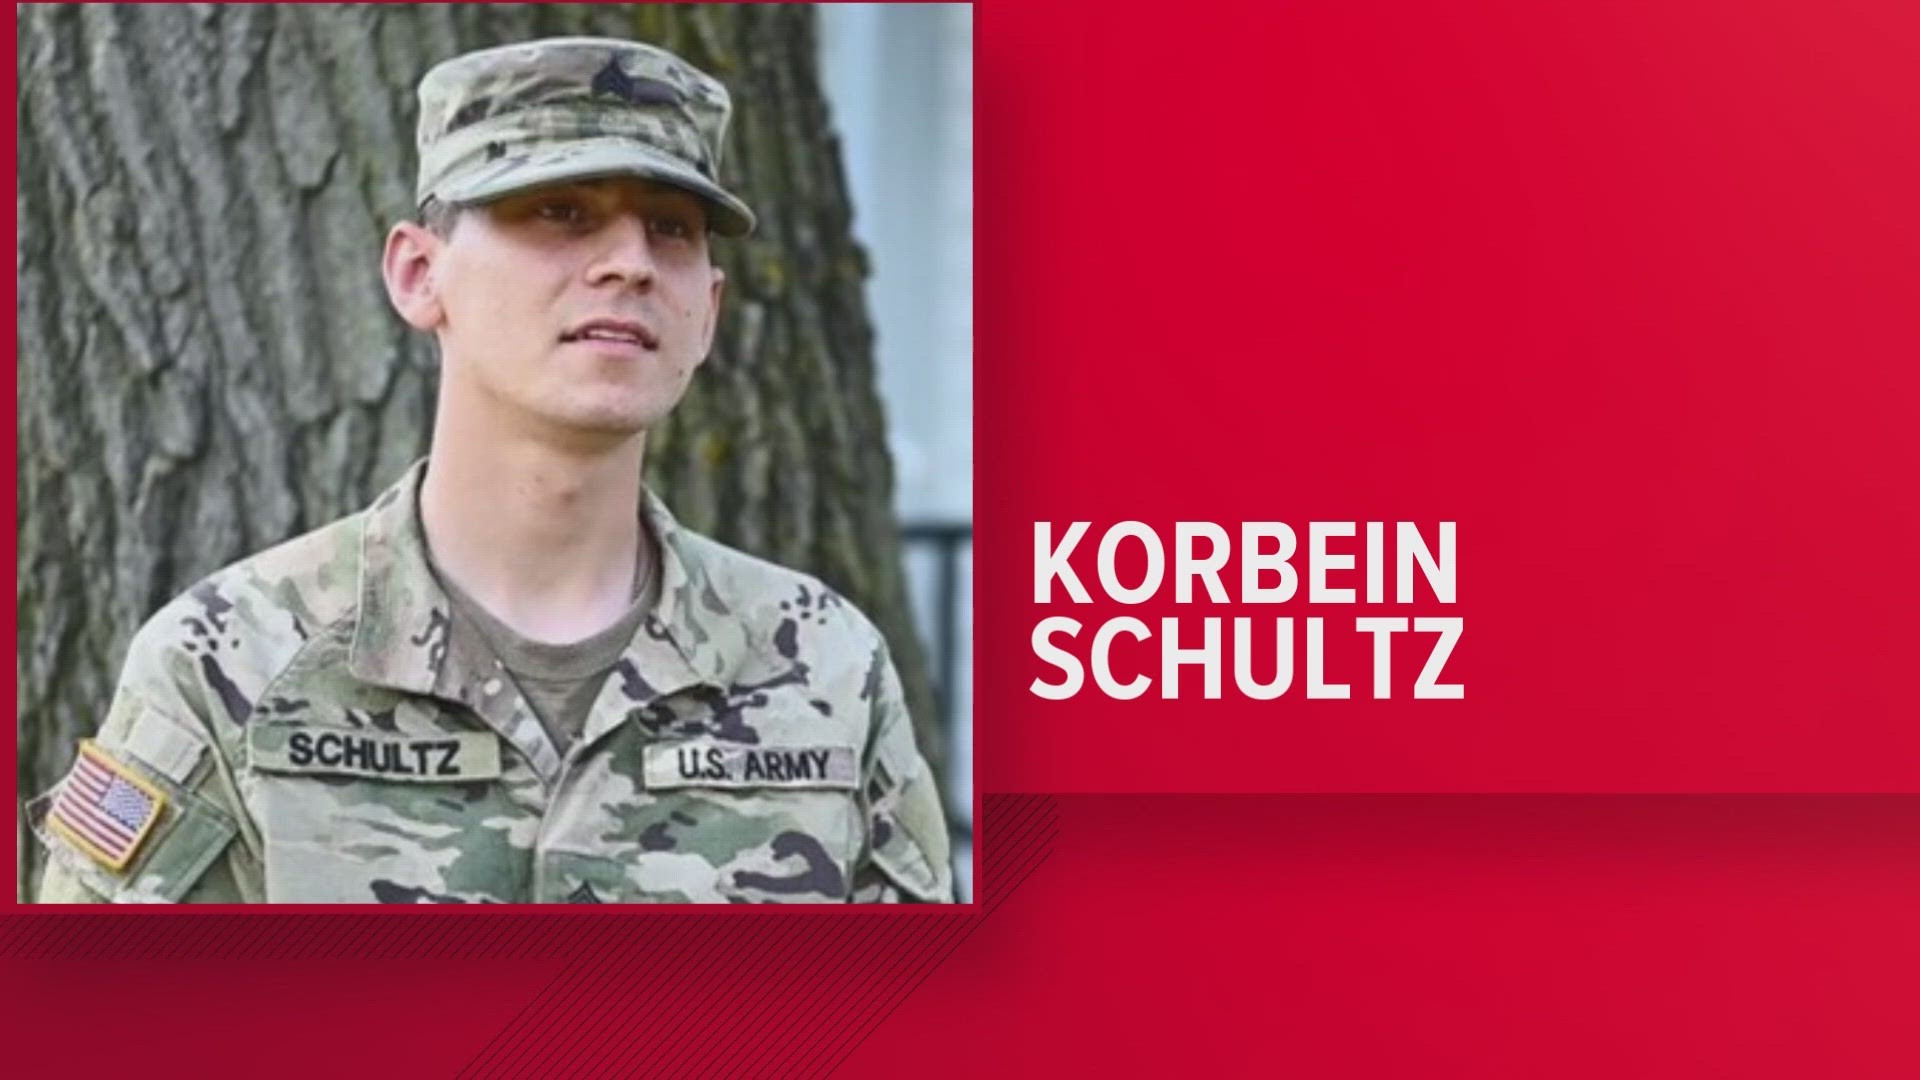 Korbein Schultz is facing a six-count federal indictment alleging he made around $42,000 from selling military secrets to someone in China.